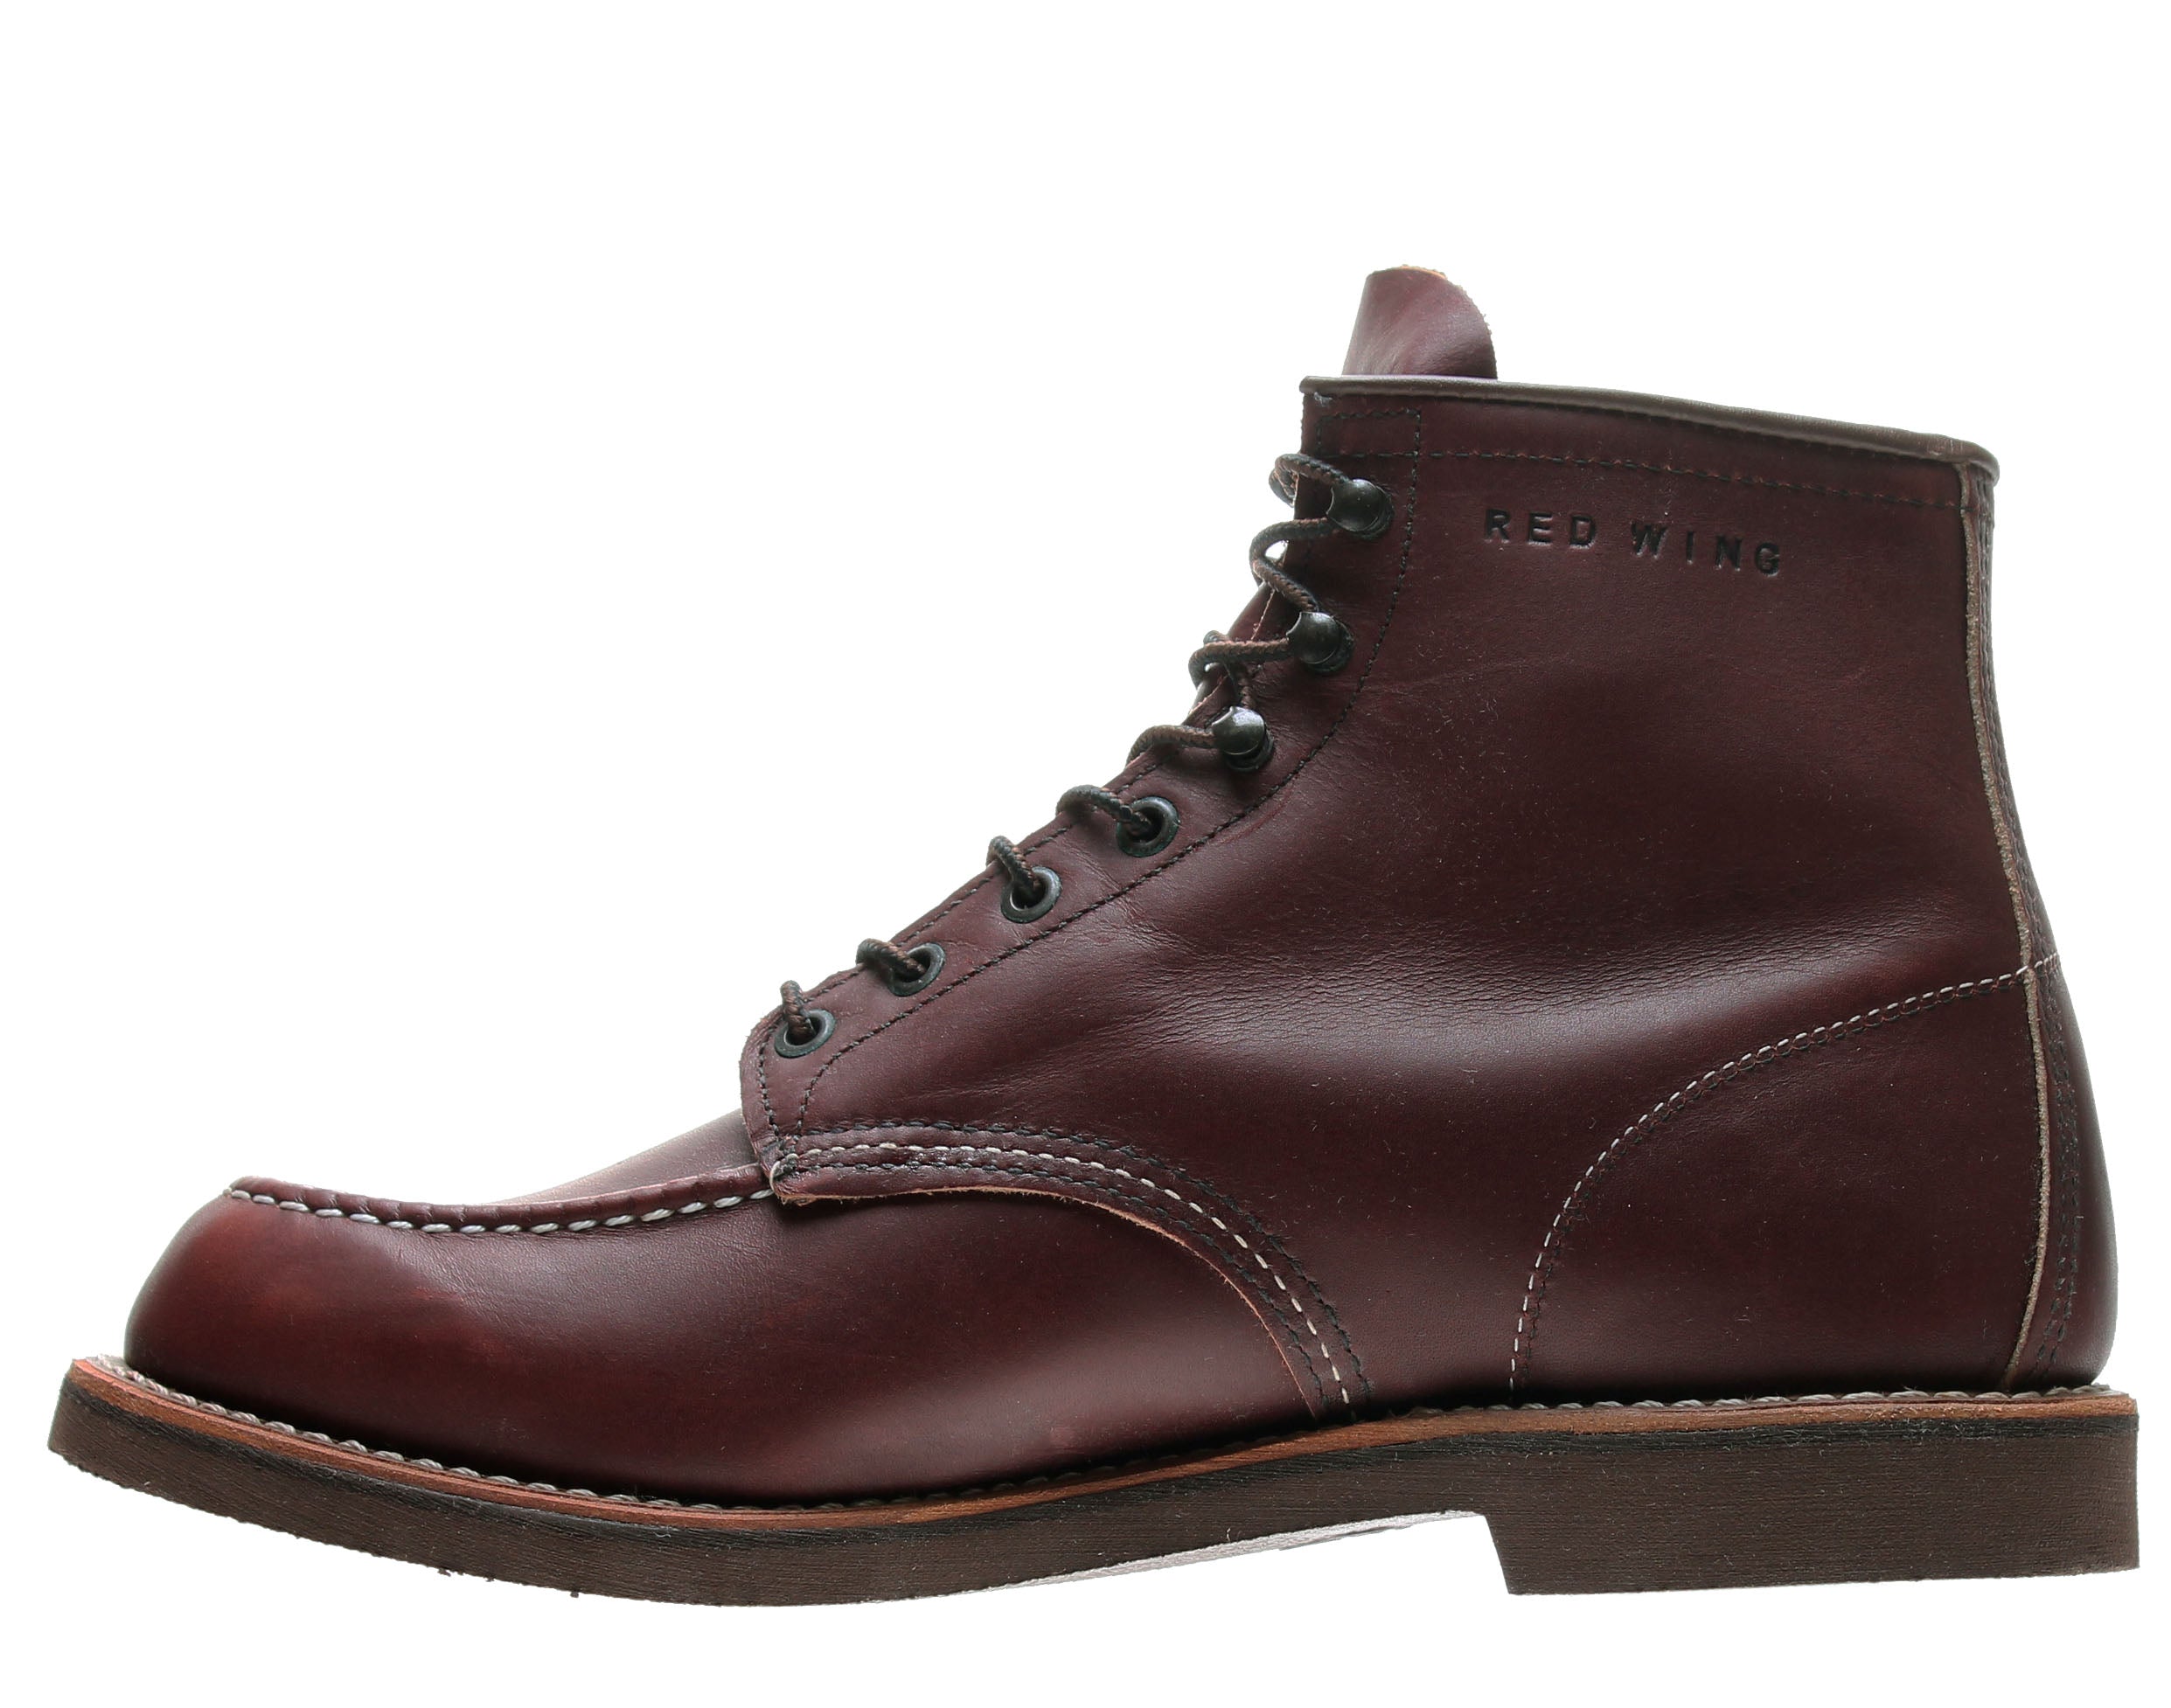 2243 ~ Red Wing – Burdge Boots